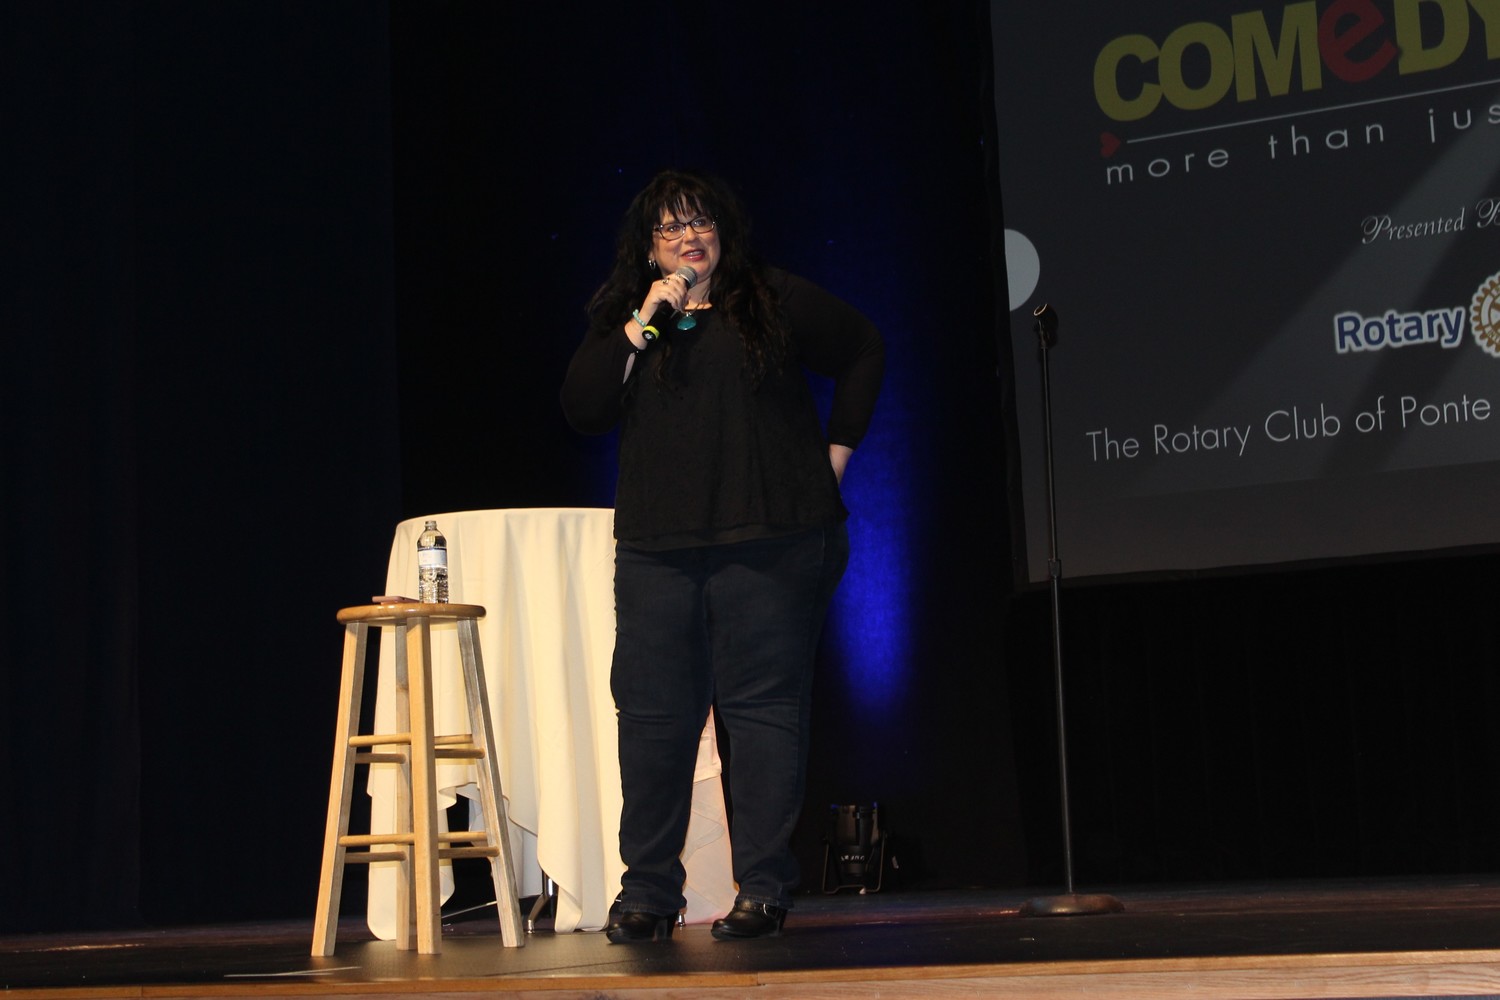 Comedian Christina Schriver entertains the crowd at the Rotary Club of Ponte Vedra Beach Sunset’s Comedy for a Cause fundraiser on April 21 at UNF’s Robinson Theater.